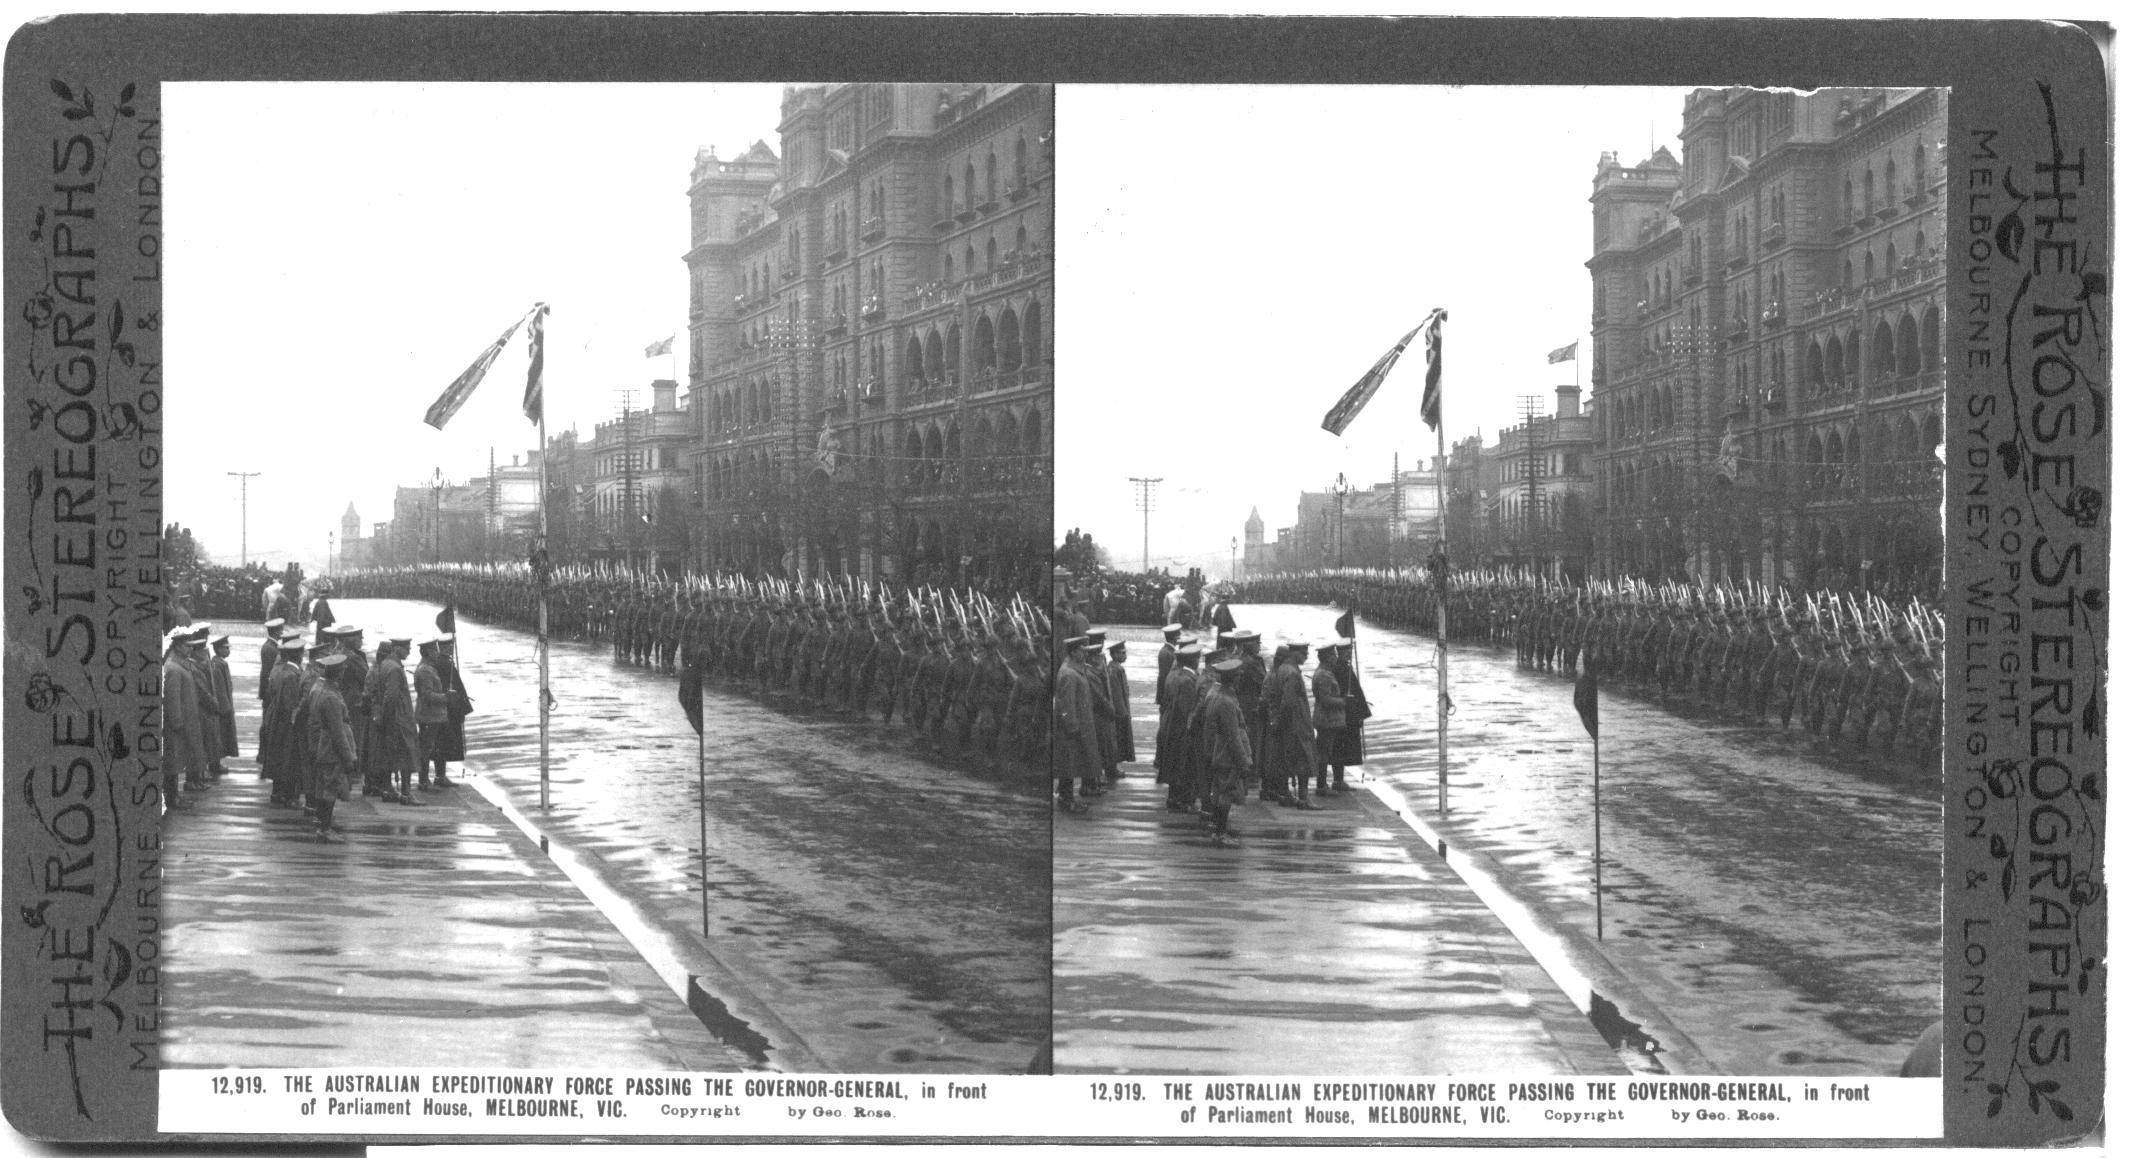 THE AUSTRALIAN EXPEDITIONARY FORCE PASSING THE GOVERNOR-GENERAL, in front of Parliament House, MELBOURNE, VIC.